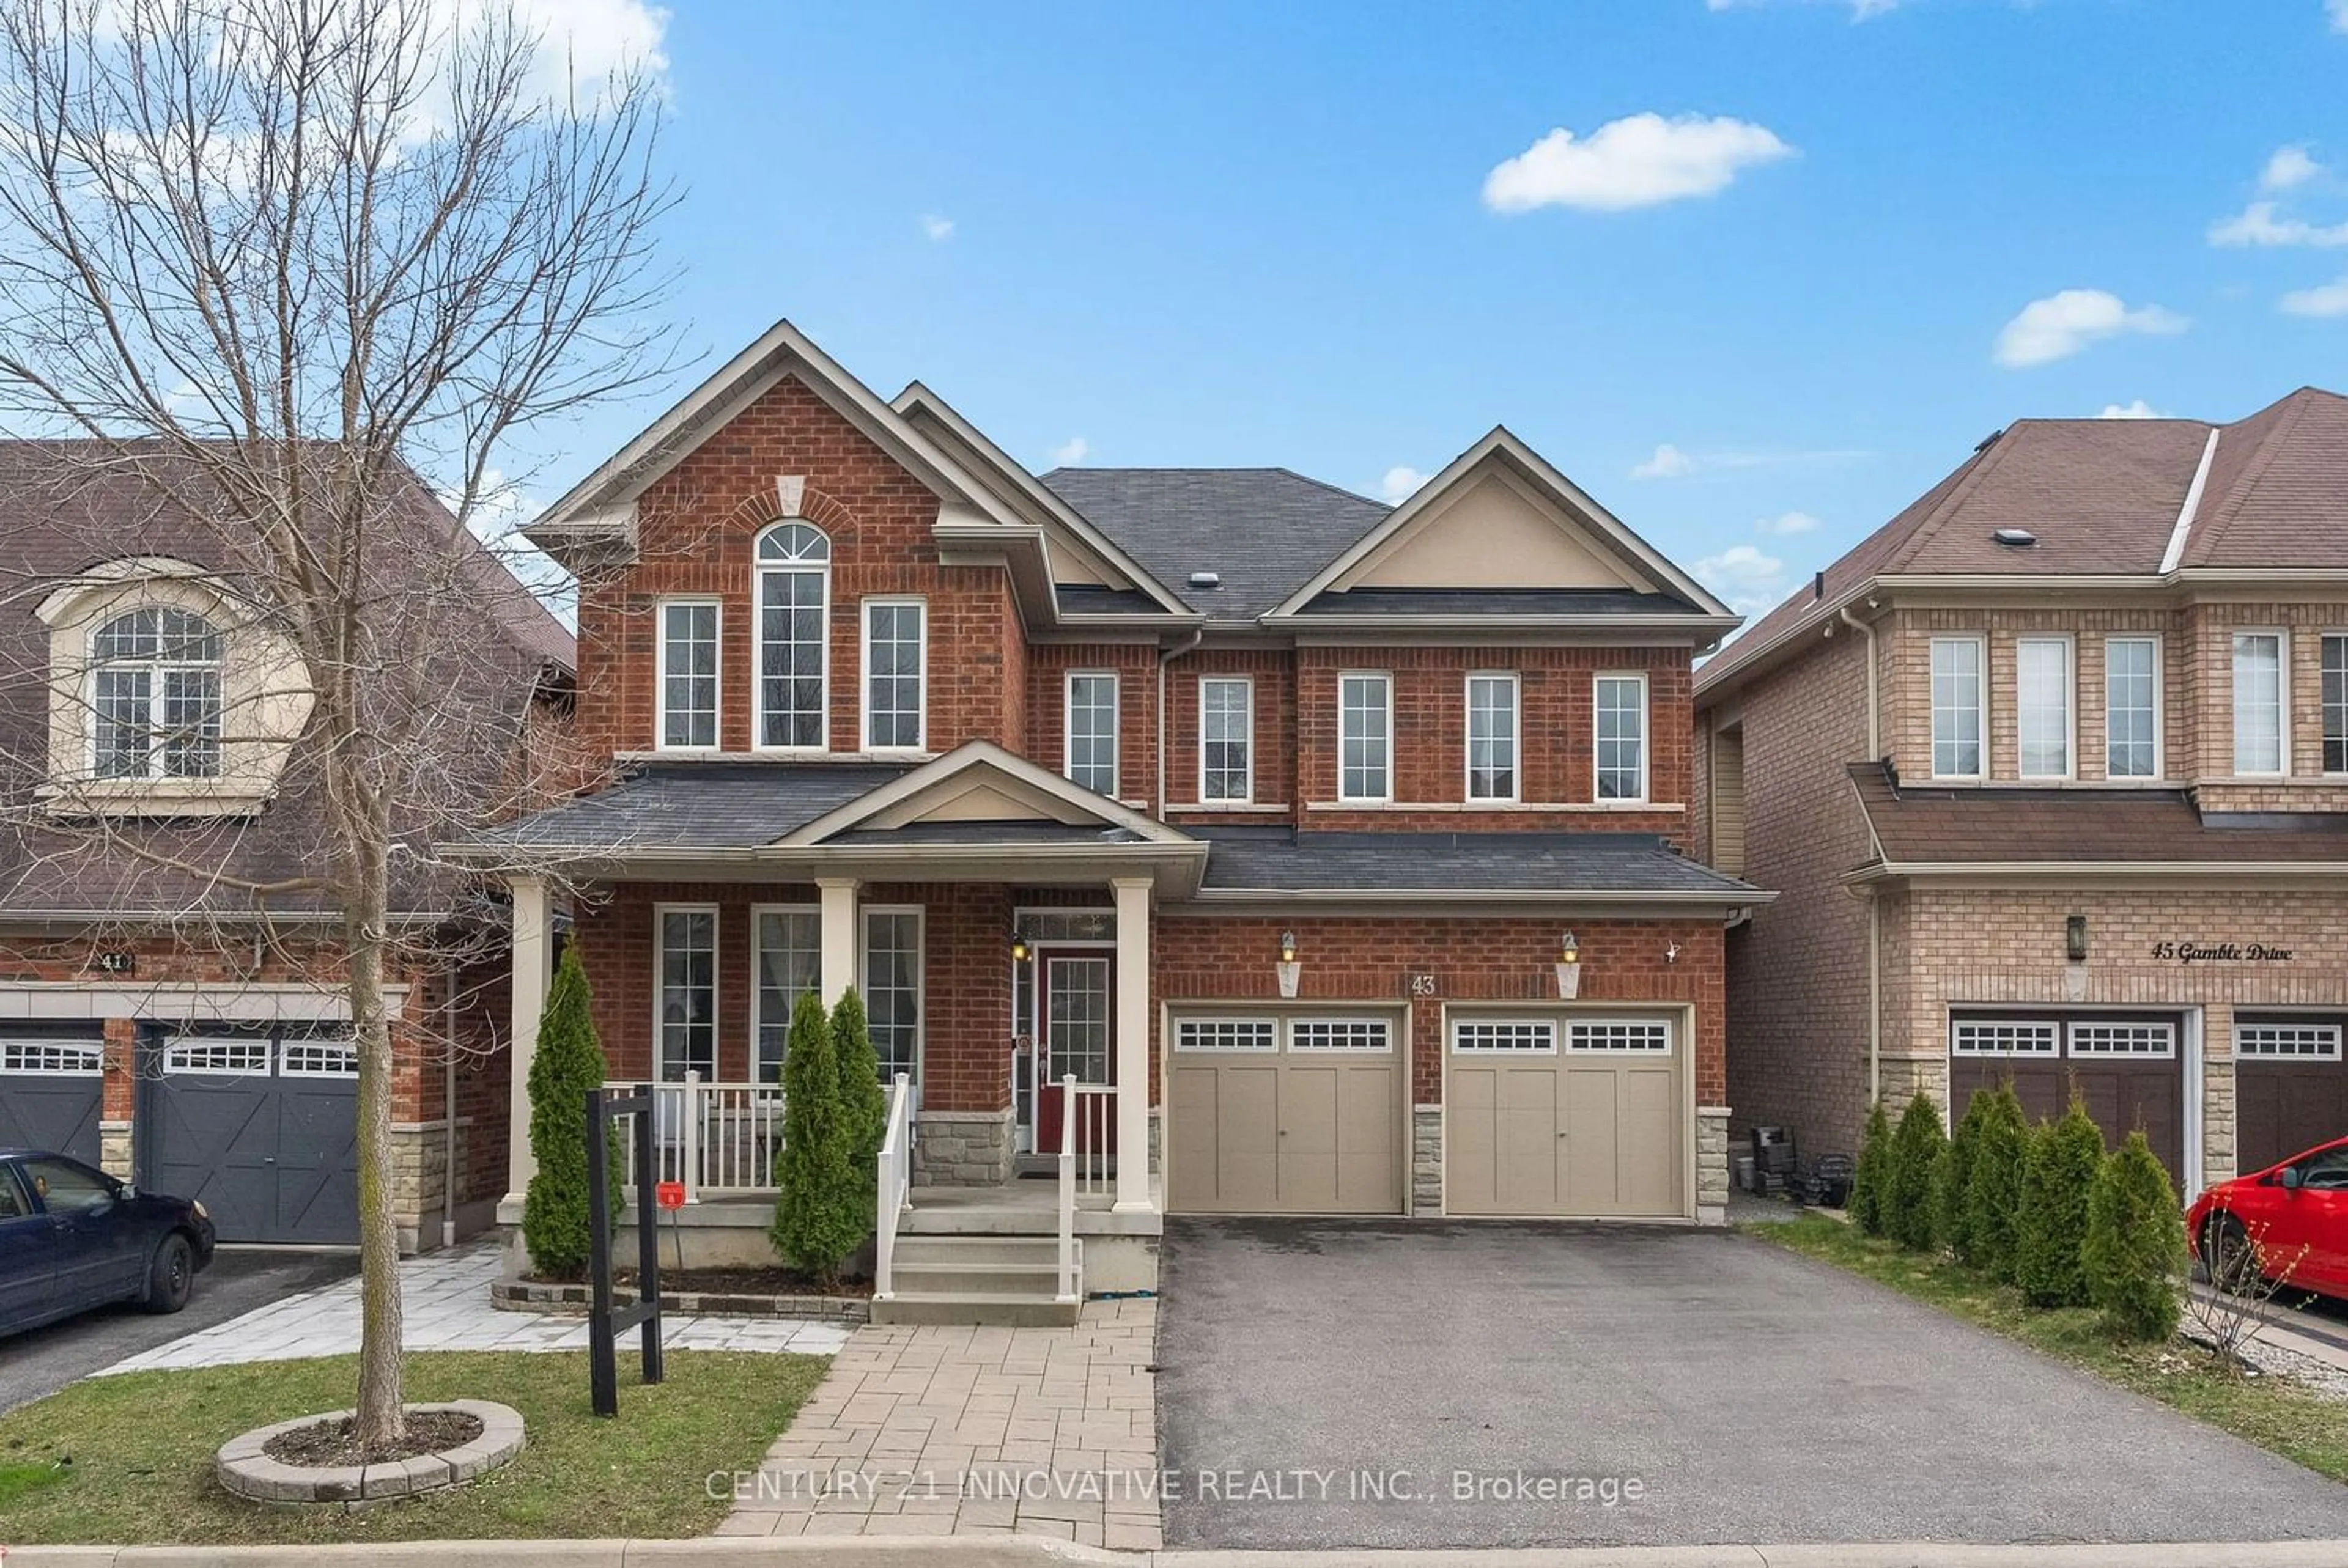 Home with brick exterior material for 43 Gamble Dr, Ajax Ontario L1Z 0H7